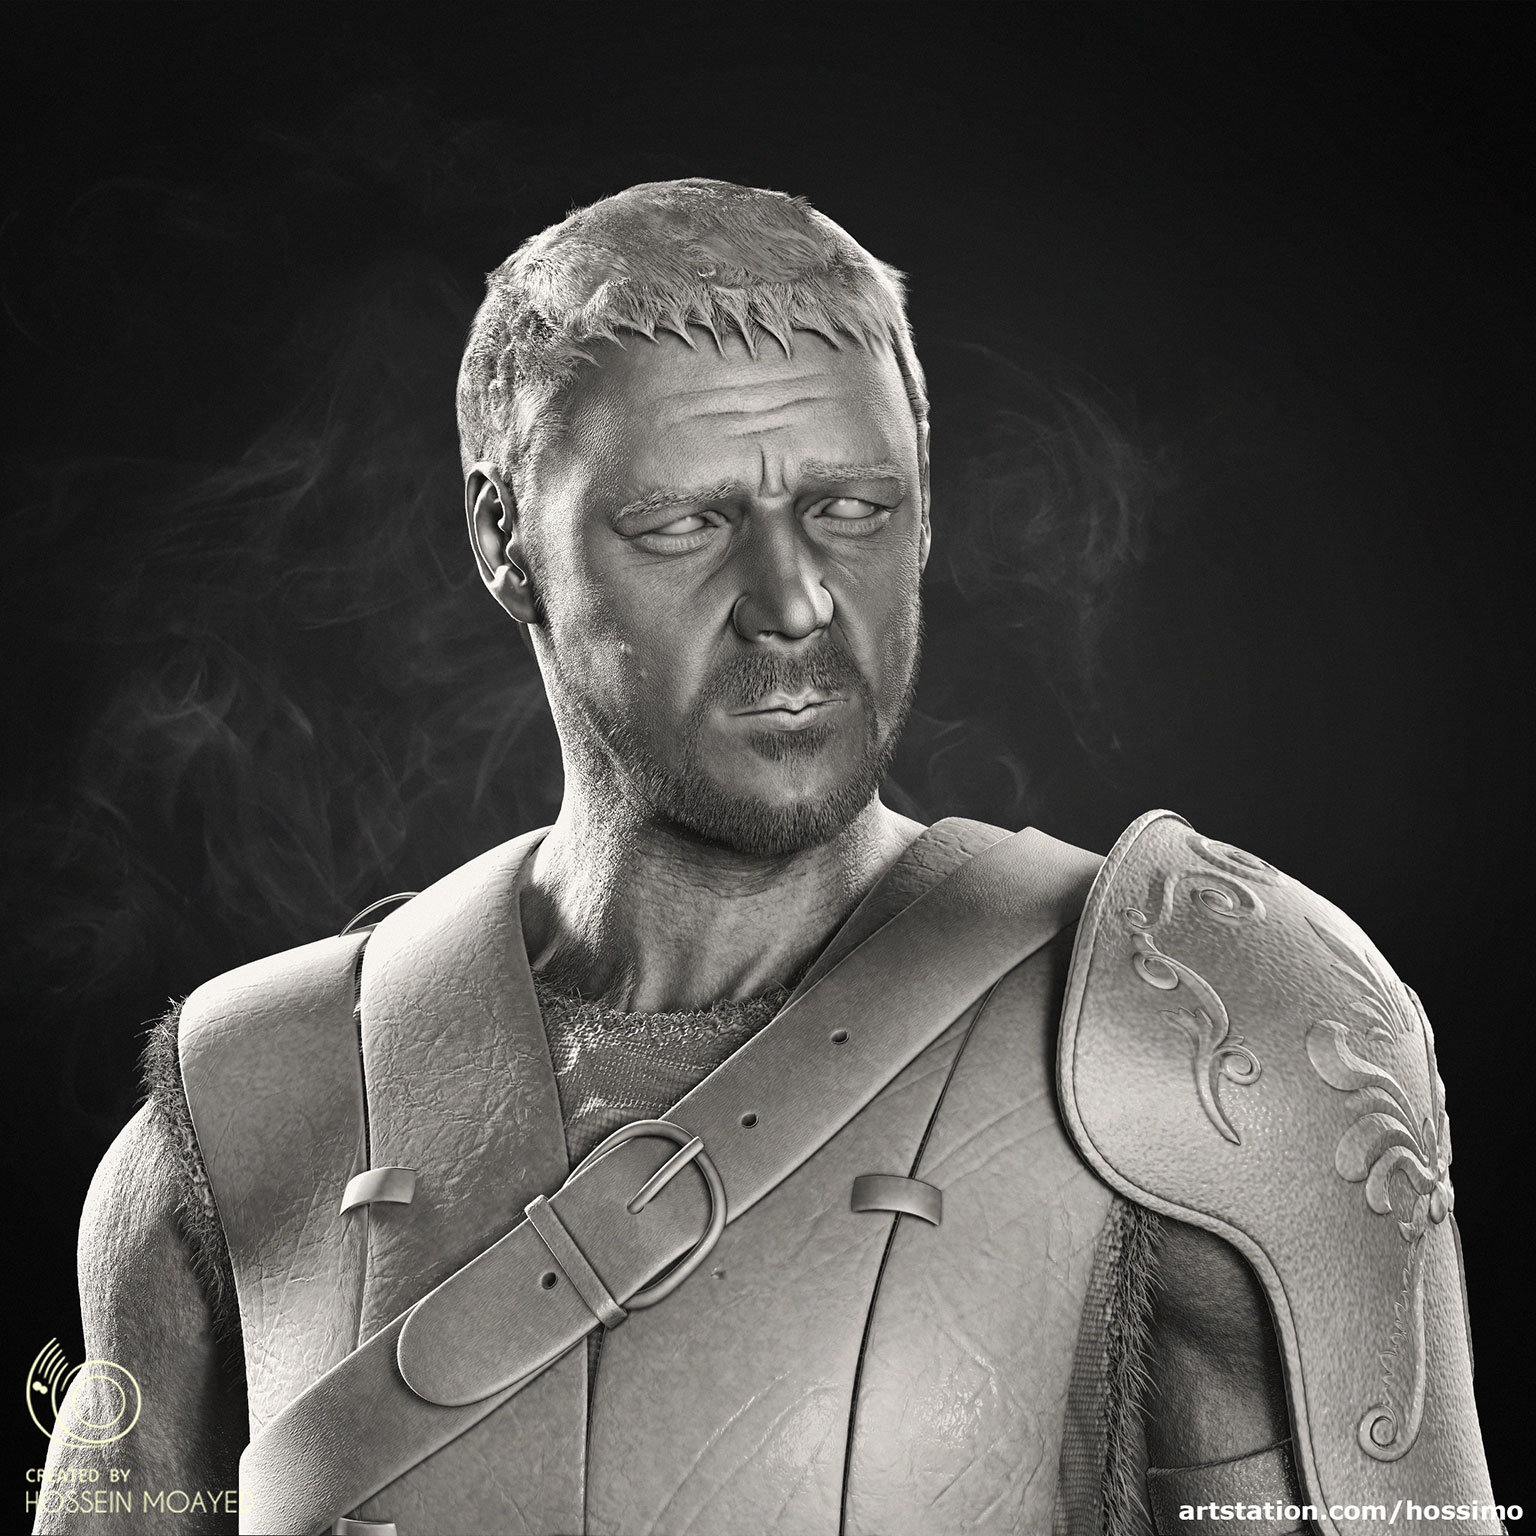 gladiator_tribute_sculpture_2_by_hossimo_square.jpg